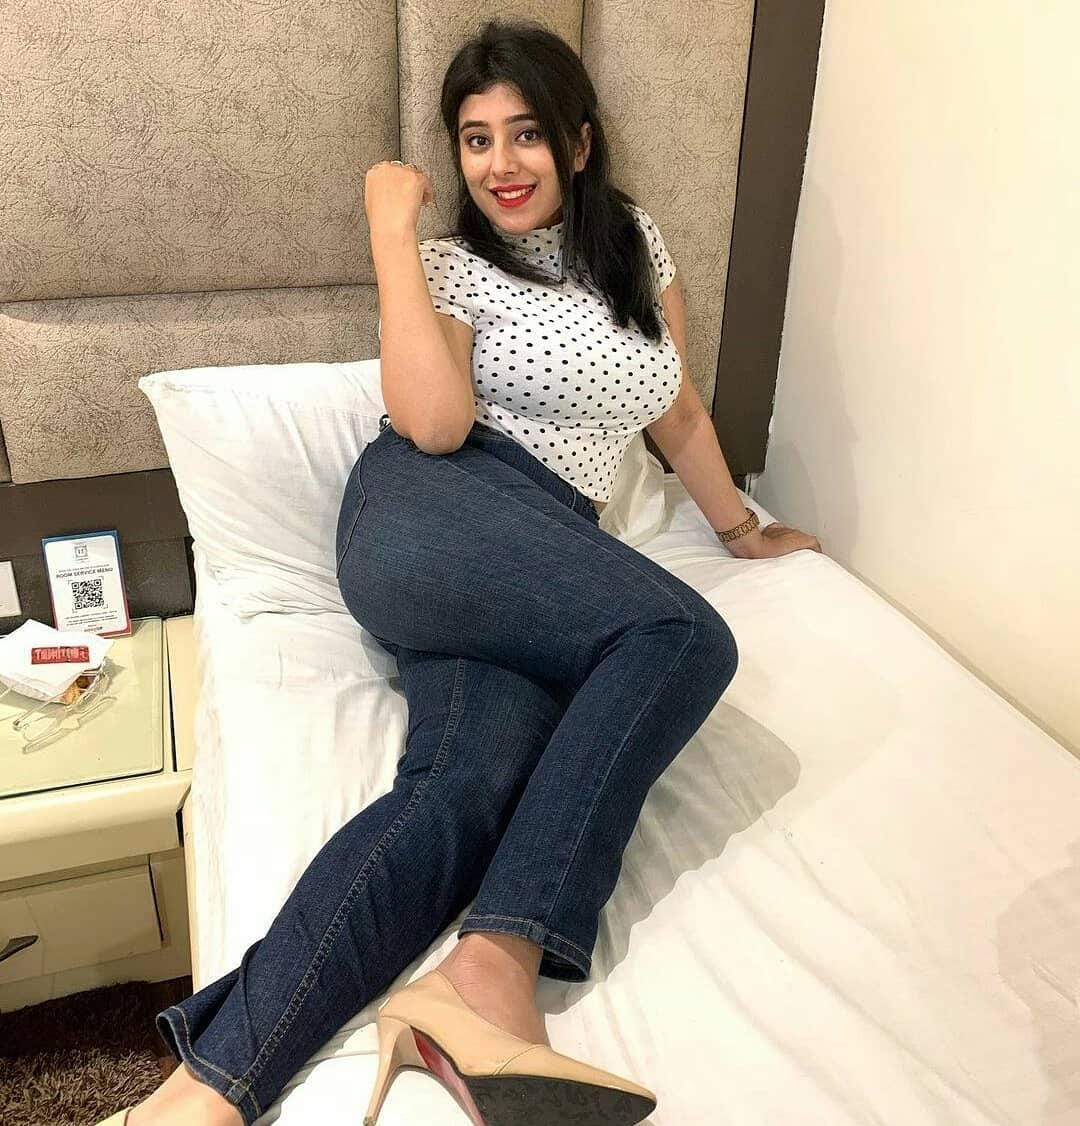 Hitech CityFull satisfied independent call Girl  ....hours available